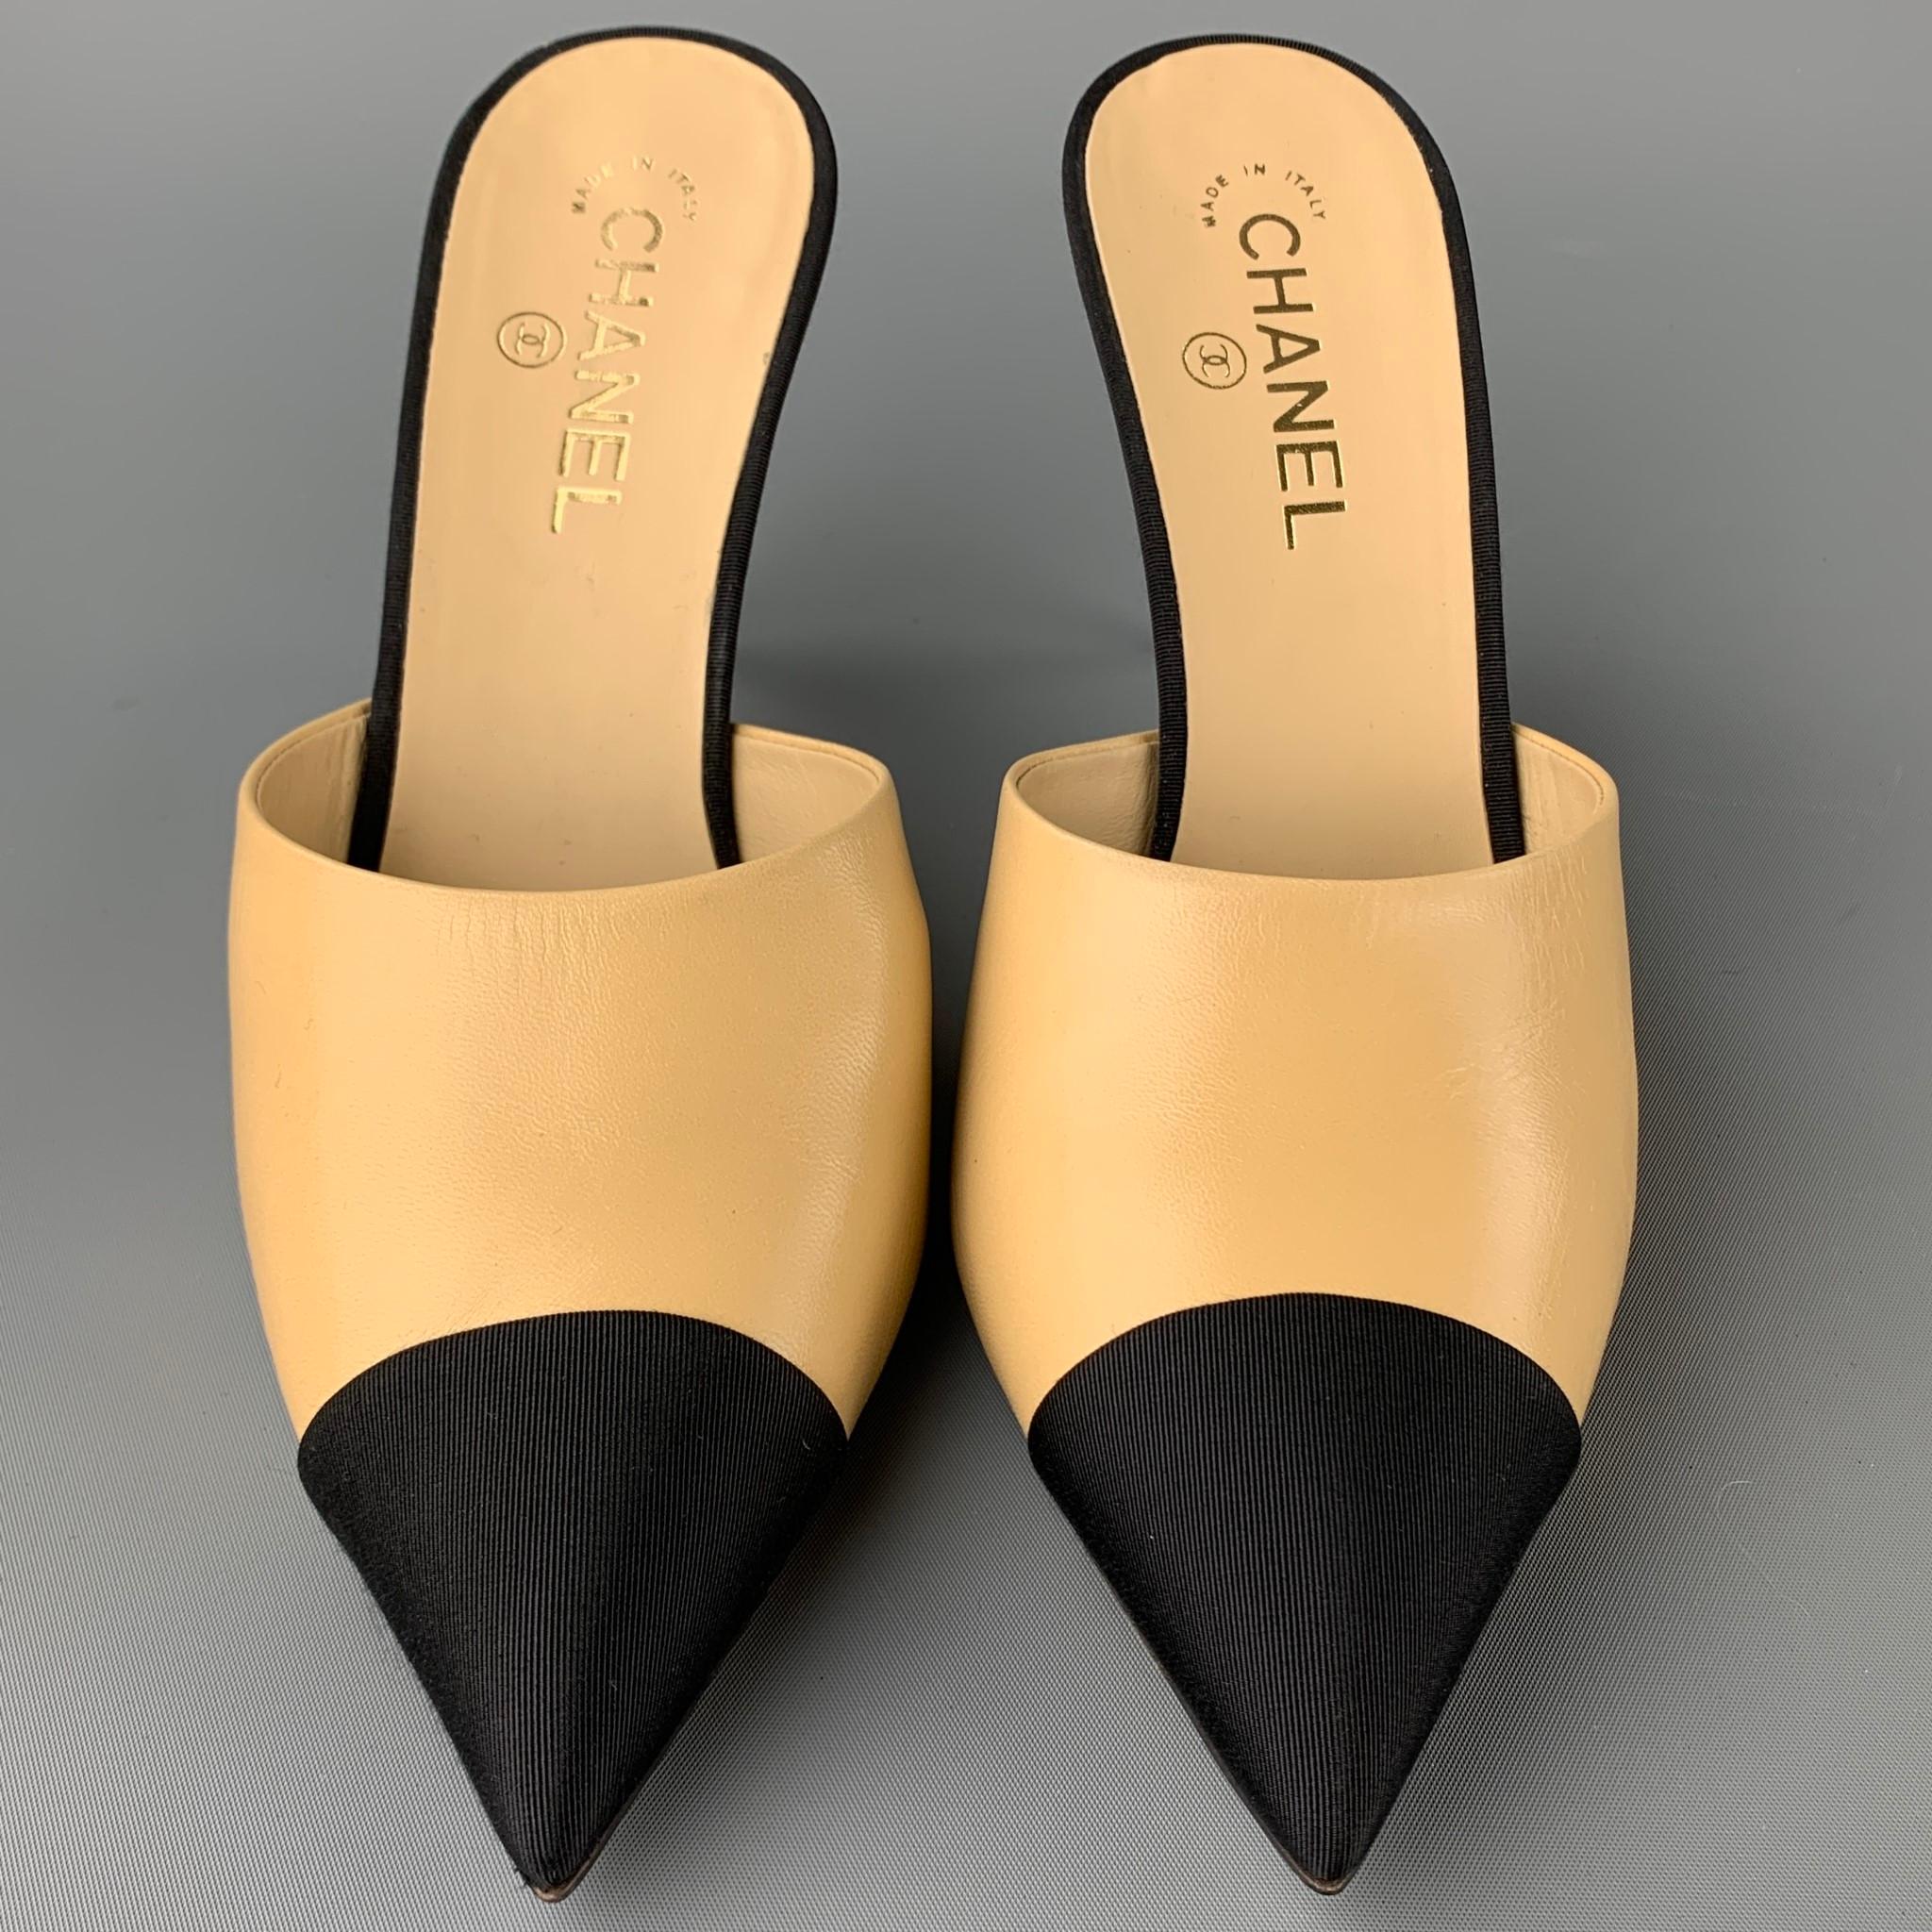 CHANEL pumps comes in a beige leather with a black grosgrain trim featuring a mule style, pointed toe, and a pearl CC design. Made in Italy.

Excellent Pre-Owned Condition.
Marked: EU 41

Measurements:

Heel: 4 in.